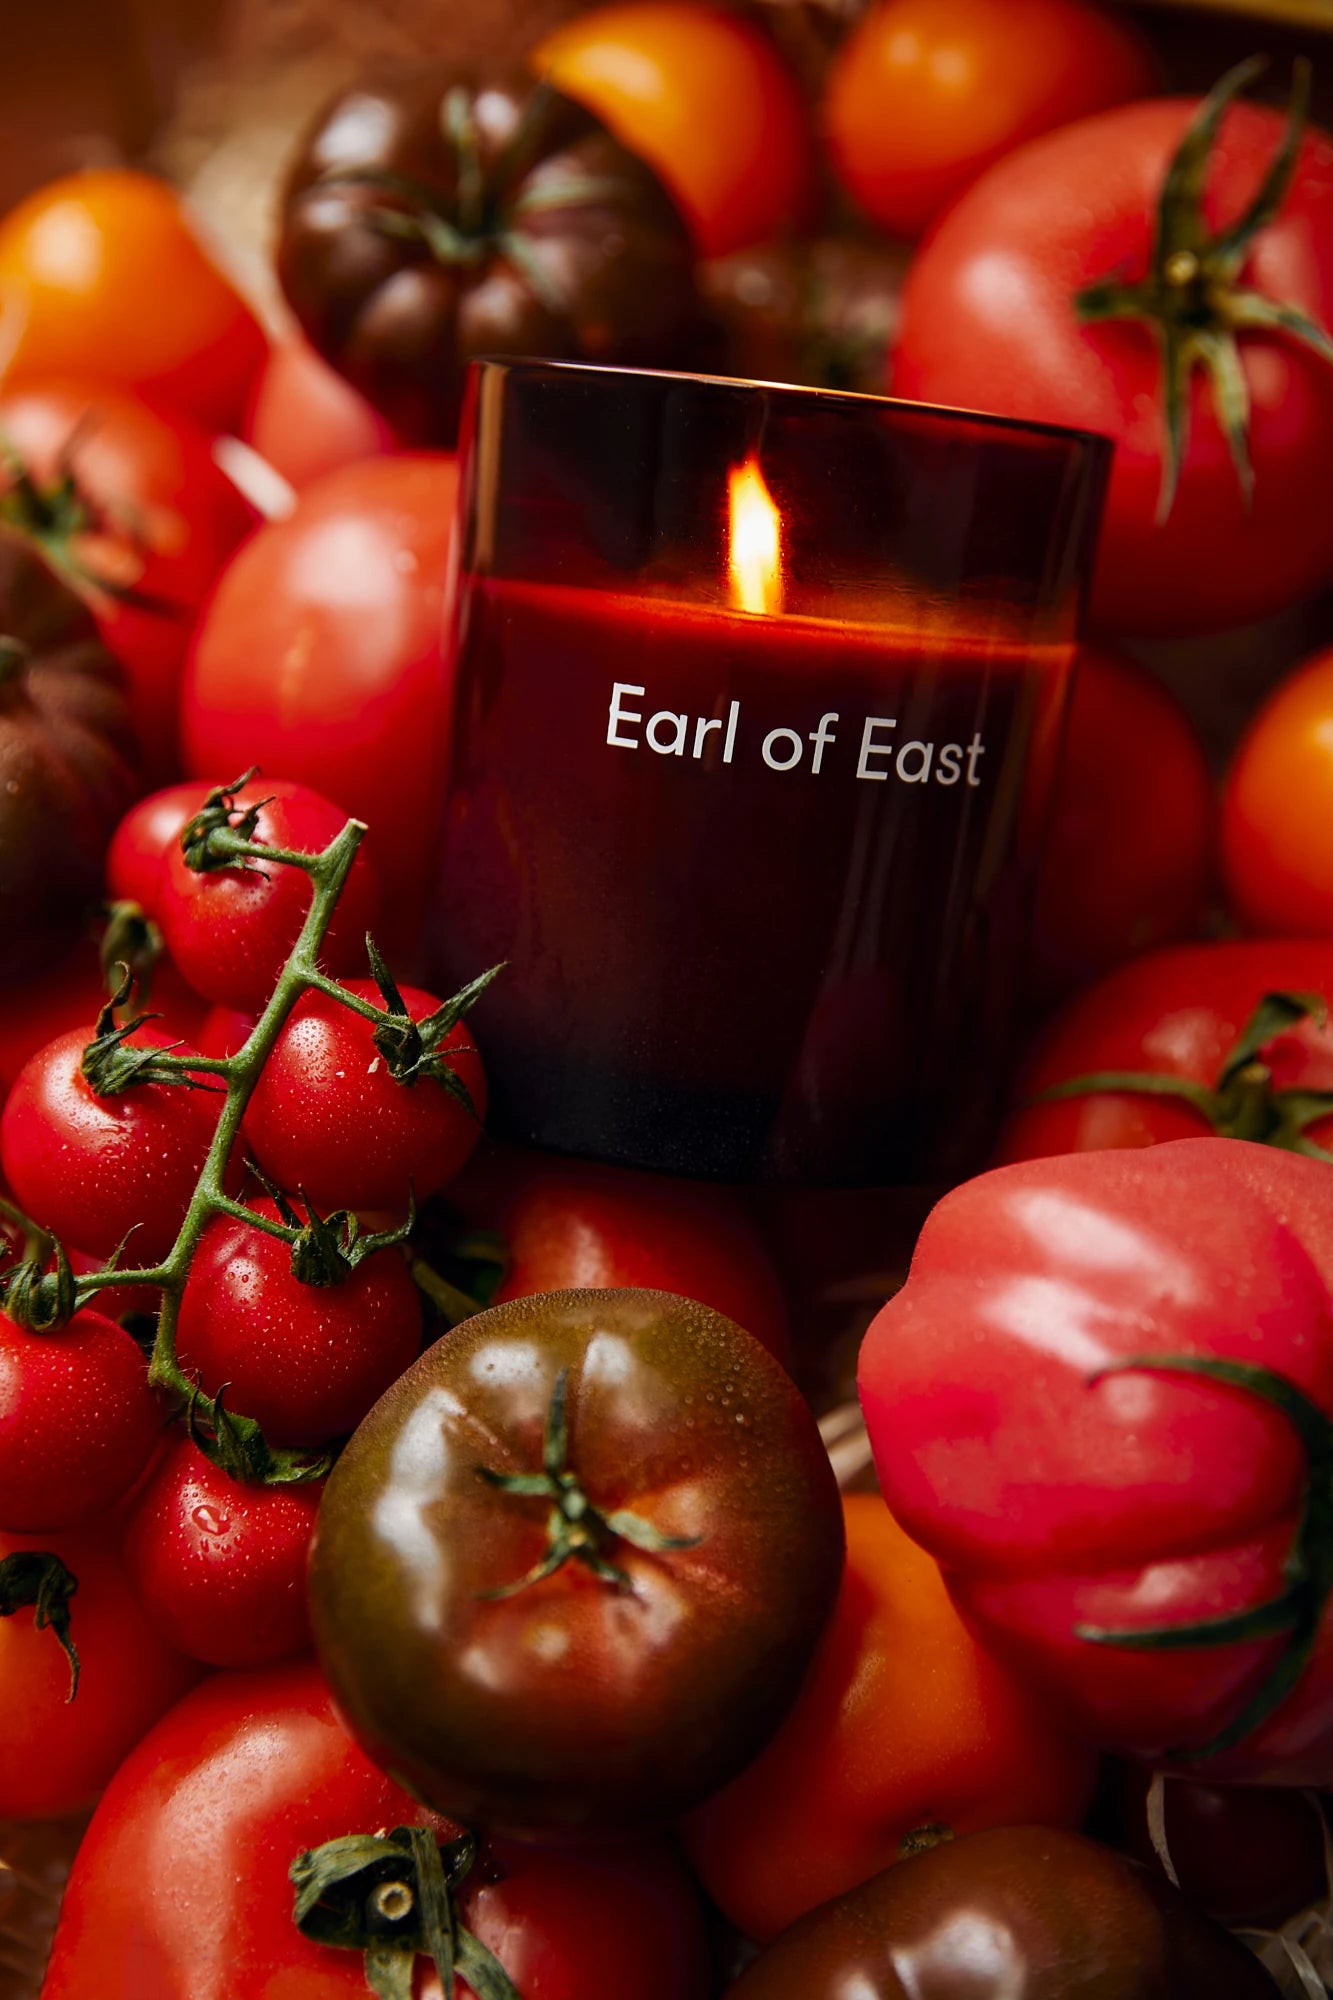 Greenhouse Candle | 260ml | Vine Tomato, Parsley Seed, Basil | Soy | by Earl of East